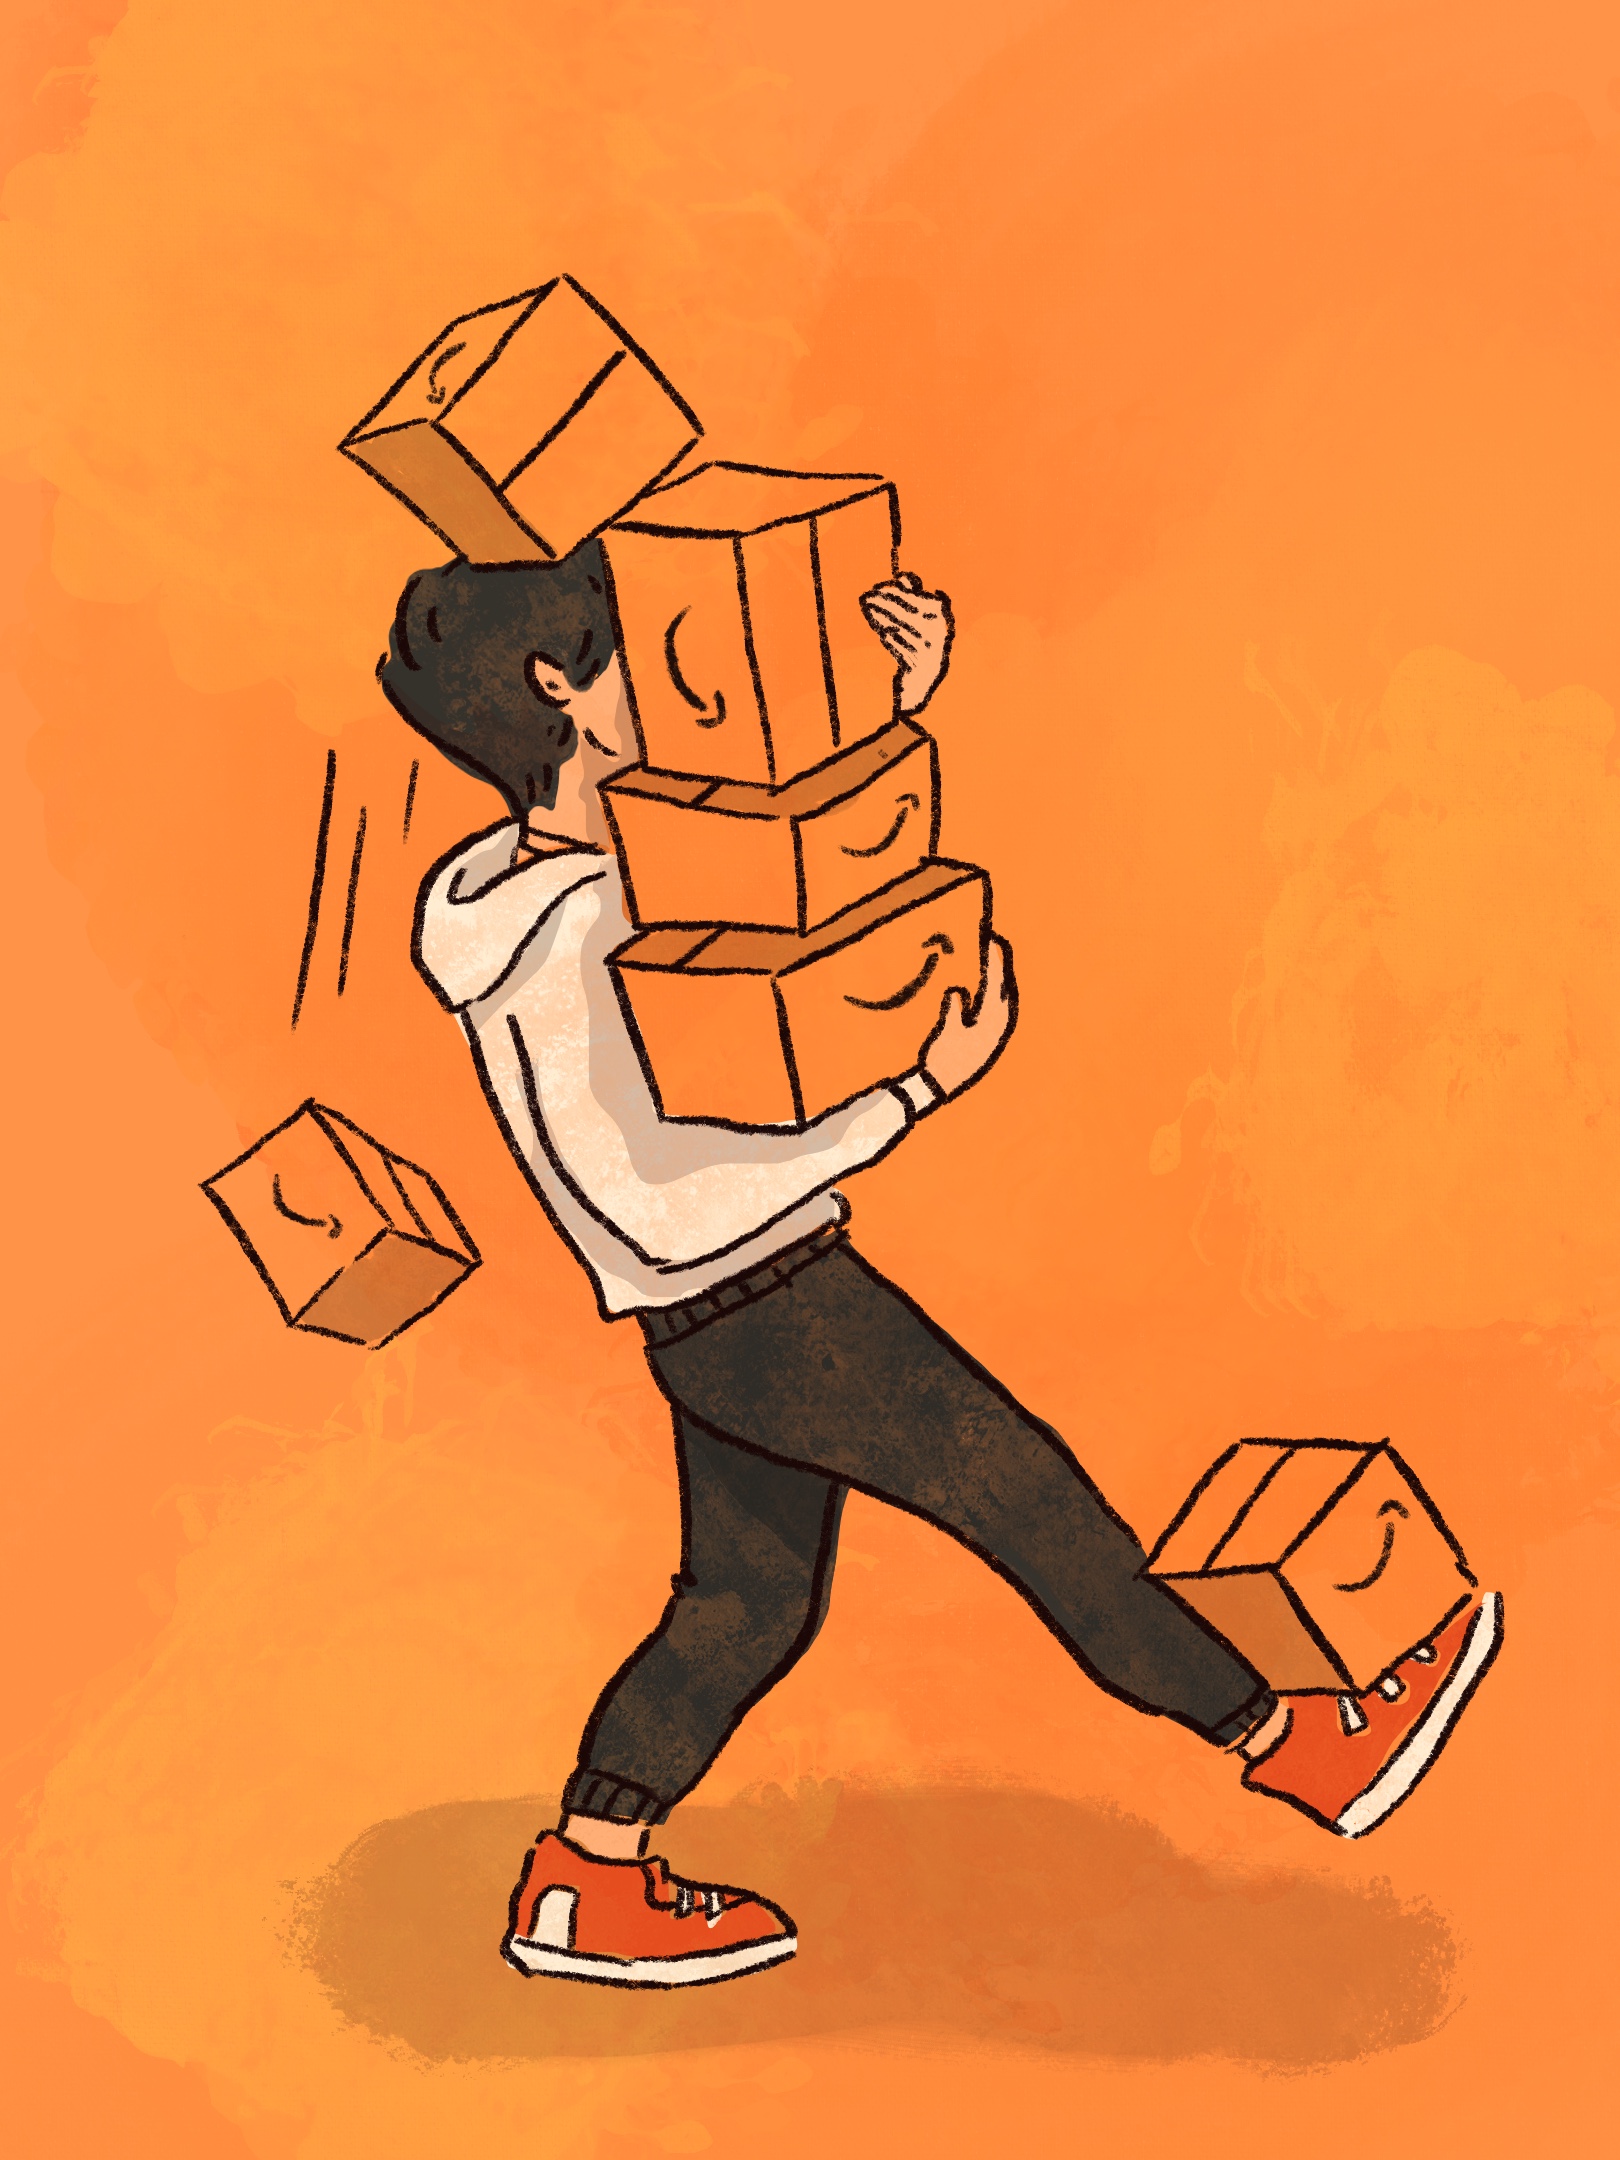 A person carries a tall stack of Amazon packages.